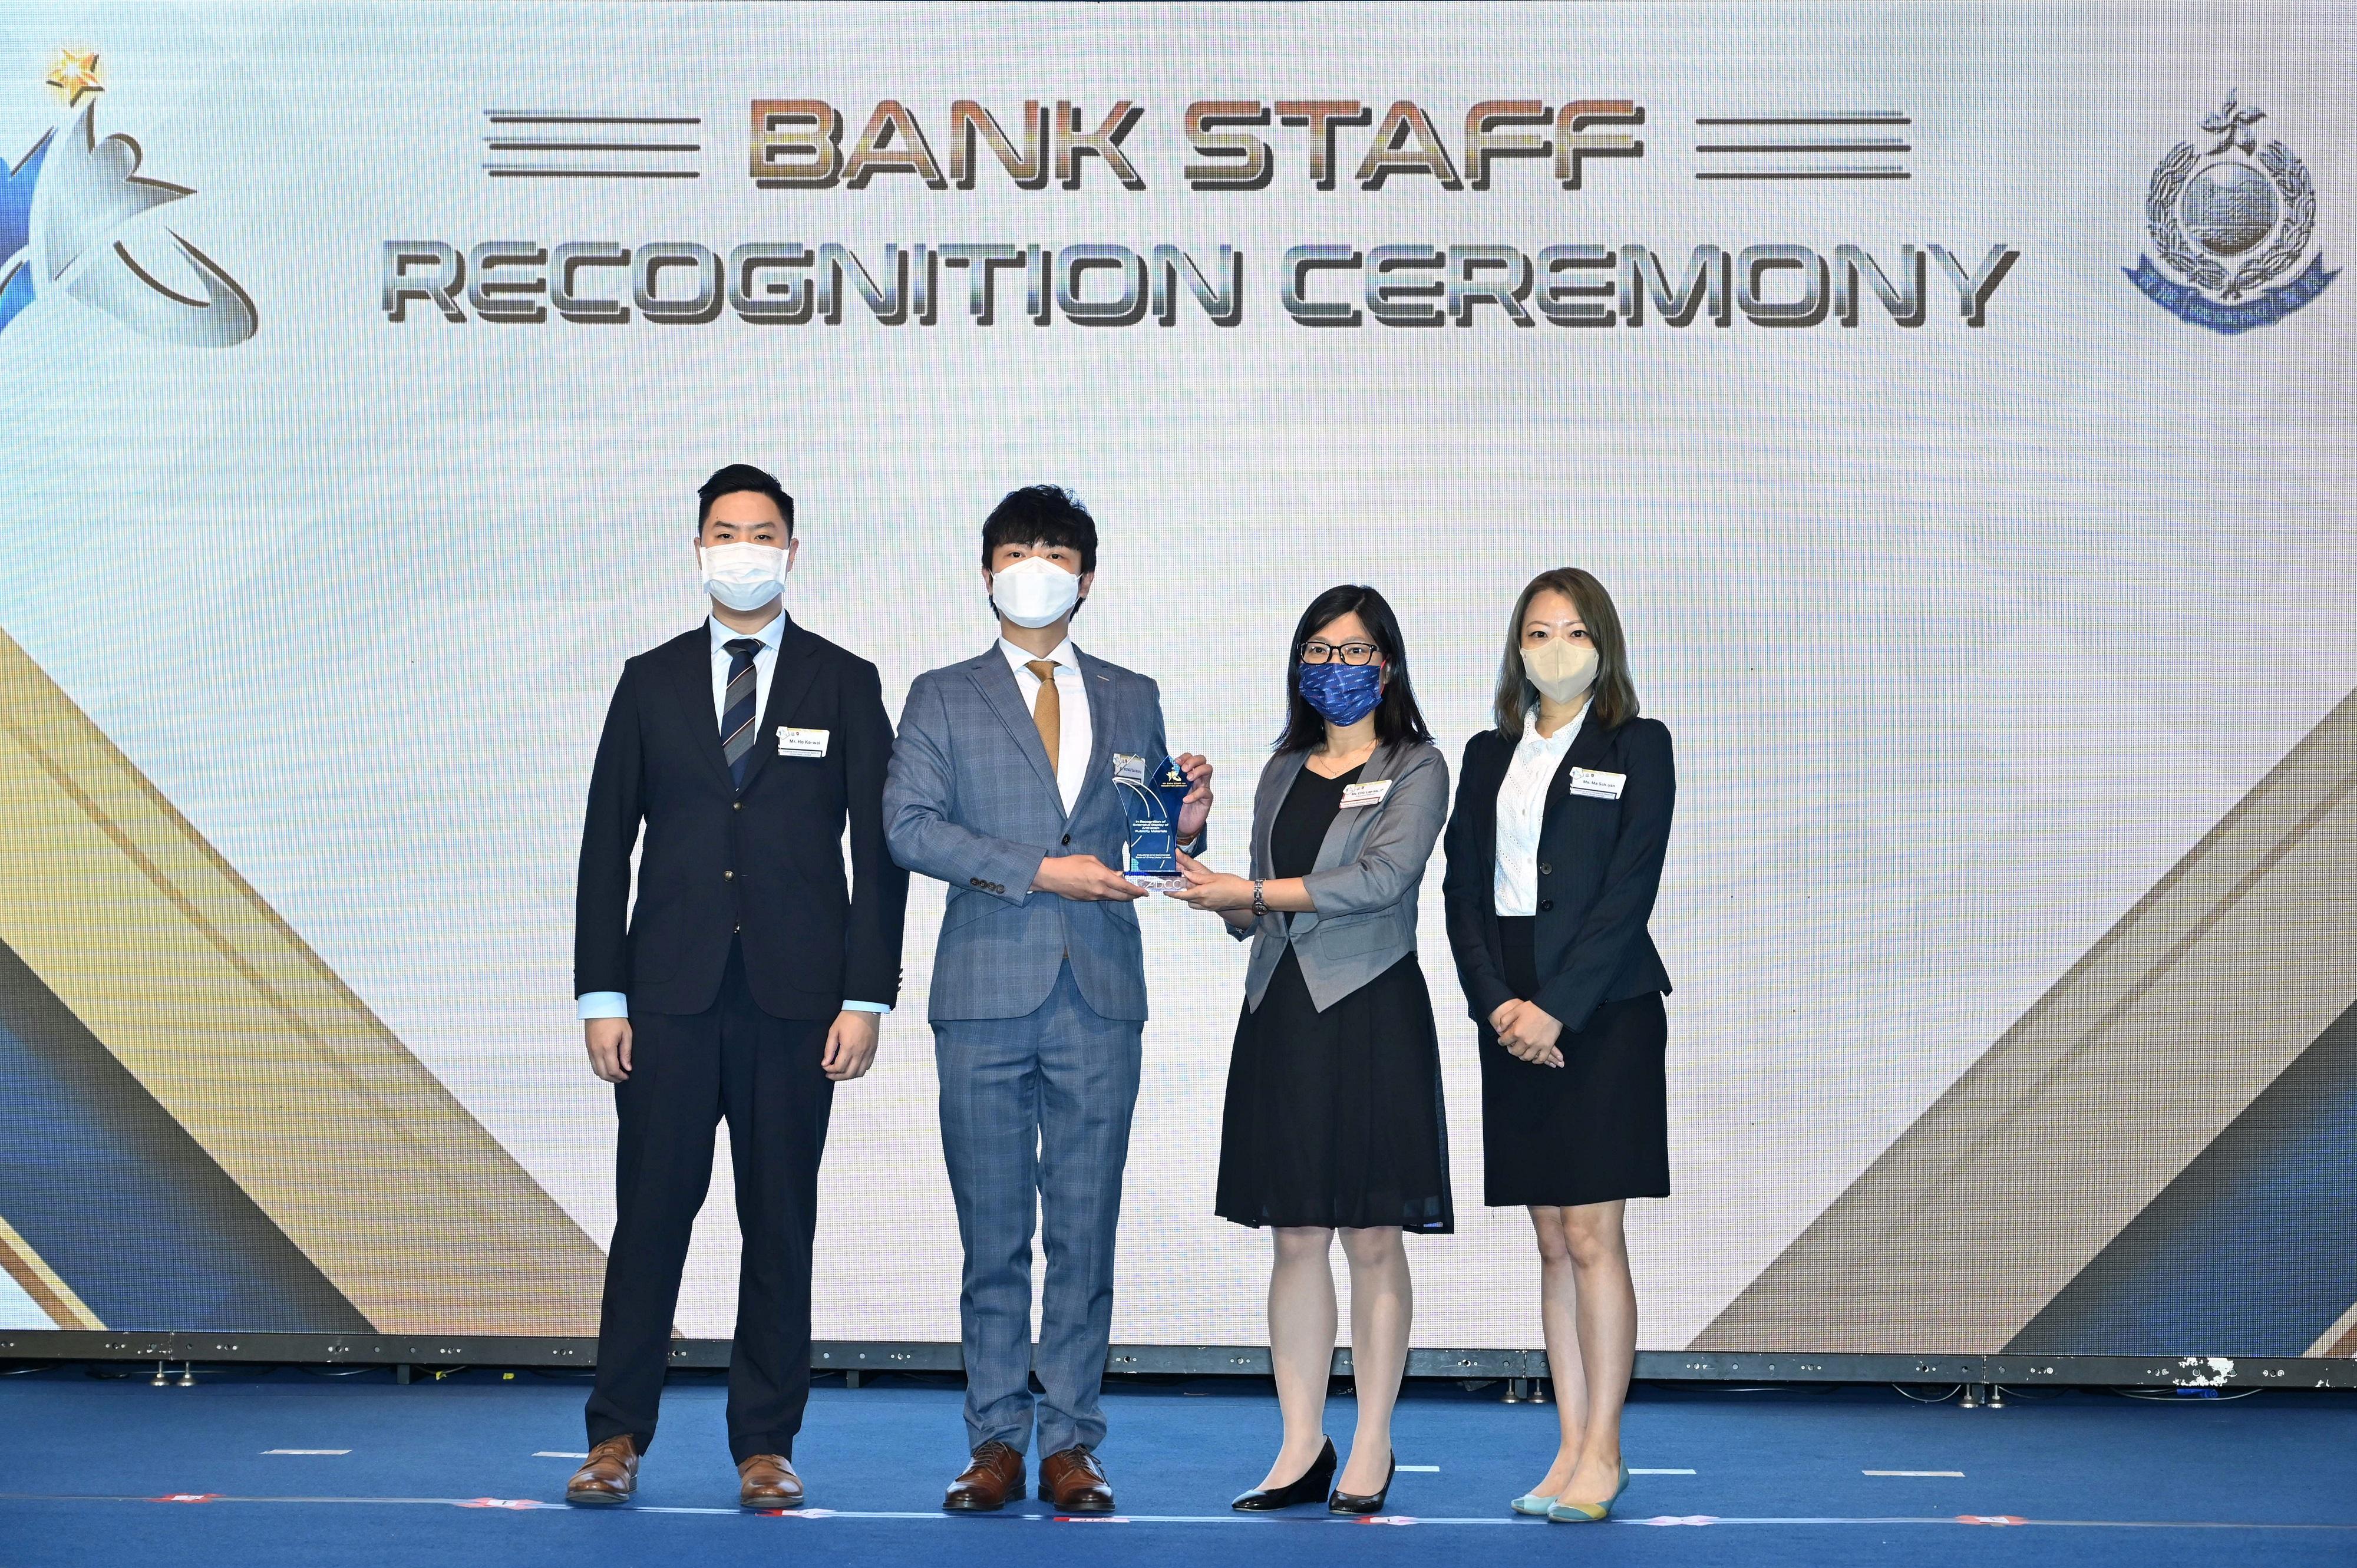 The Bank Staff Recognition Ceremony organised by the Hong Kong Police Force was held today (August 30). Photo shows Executive Director of the Hong Kong Monetary Authority, Ms Carmen Chu (second right), presenting the Corporate Award "Extensive Display of Anti-scam Publicity Materials" to the bank representatives.